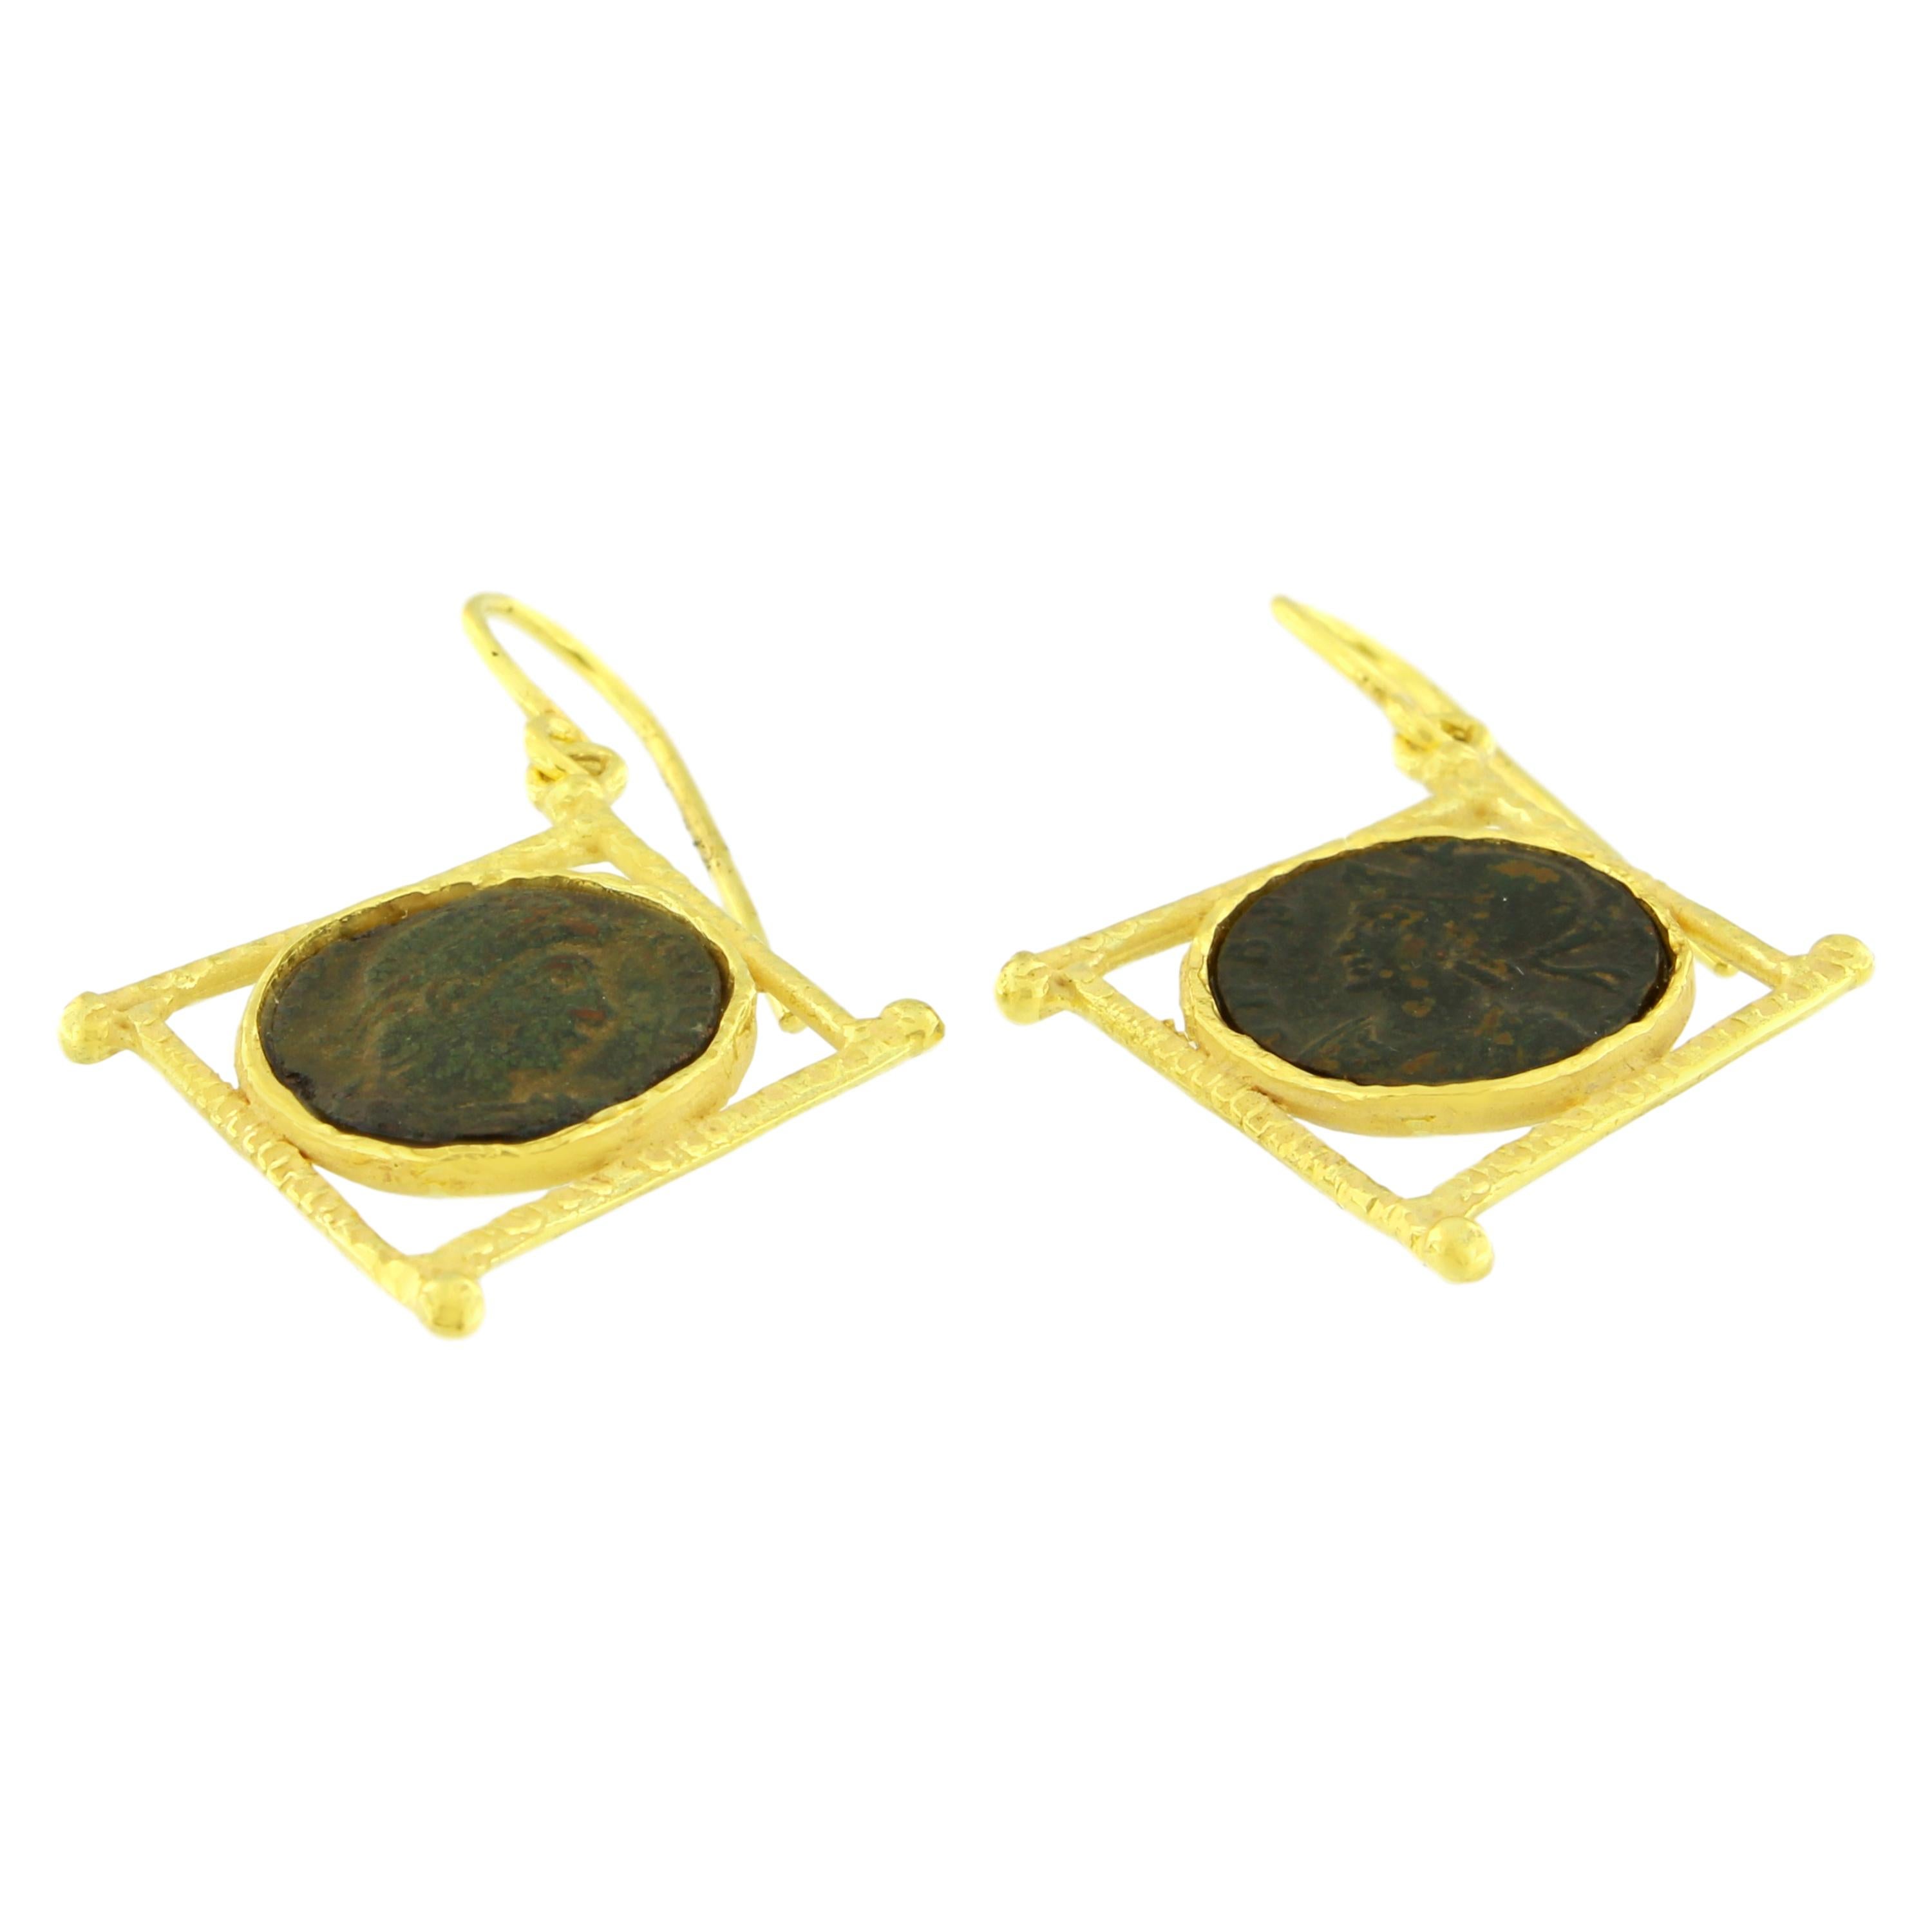 Gorgeous Satin Yellow Gold Earrings with ancient Roman Coins, from Sacchi’s 